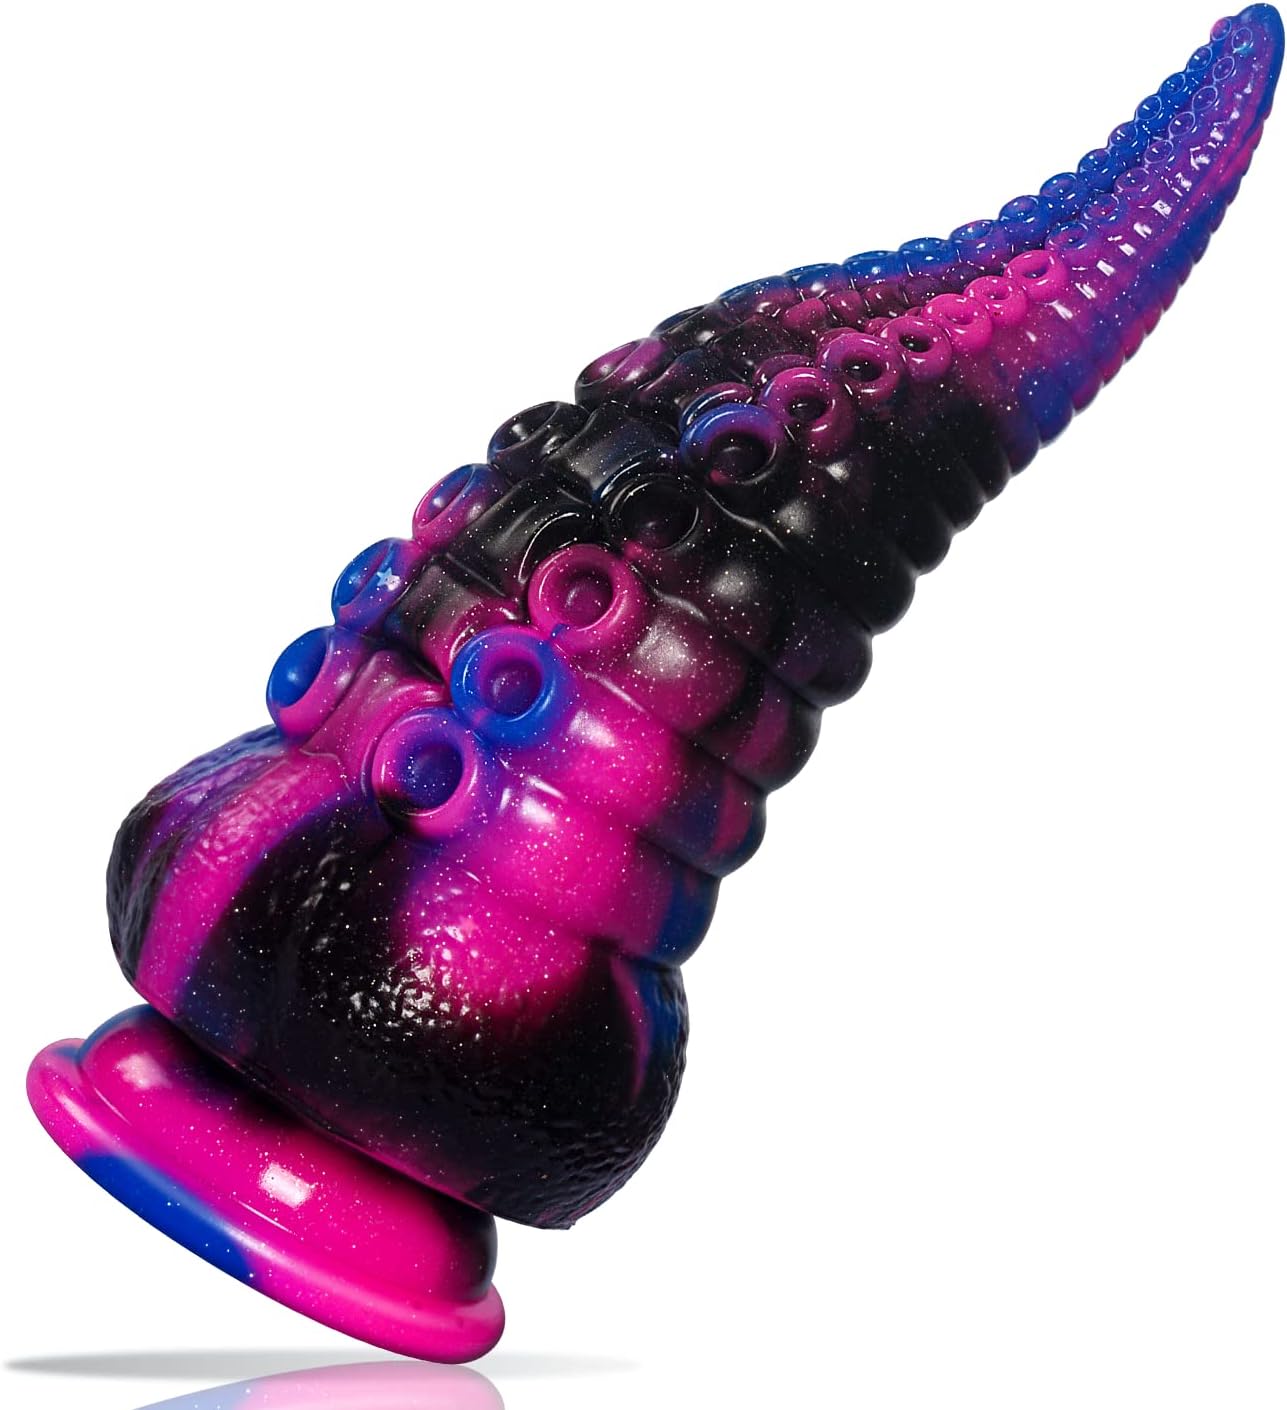 Tentacle Realistic Dildo for Women: 8.7" Big Anal Dildo with Strong Suction Cup